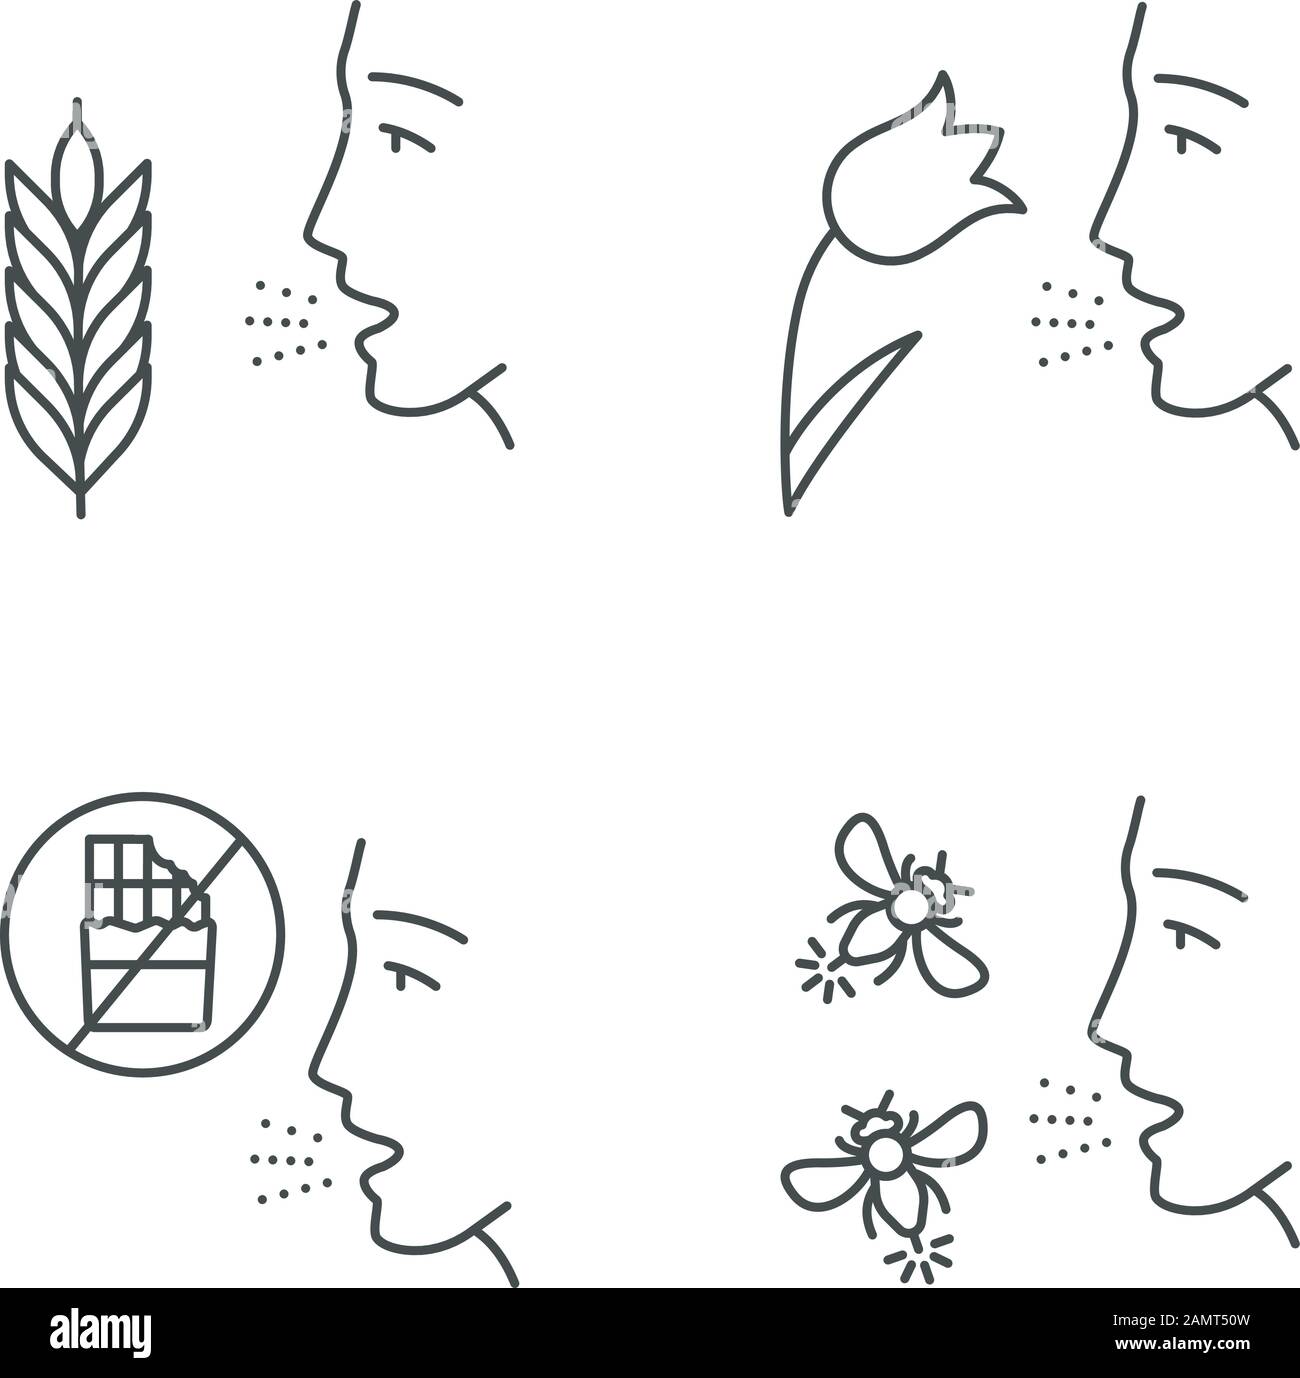 Allergies linear icons set. Hay fever, allergy to food and insects stings. Allergen sources. Medical problem. Thin line contour symbols. Isolated vect Stock Vector